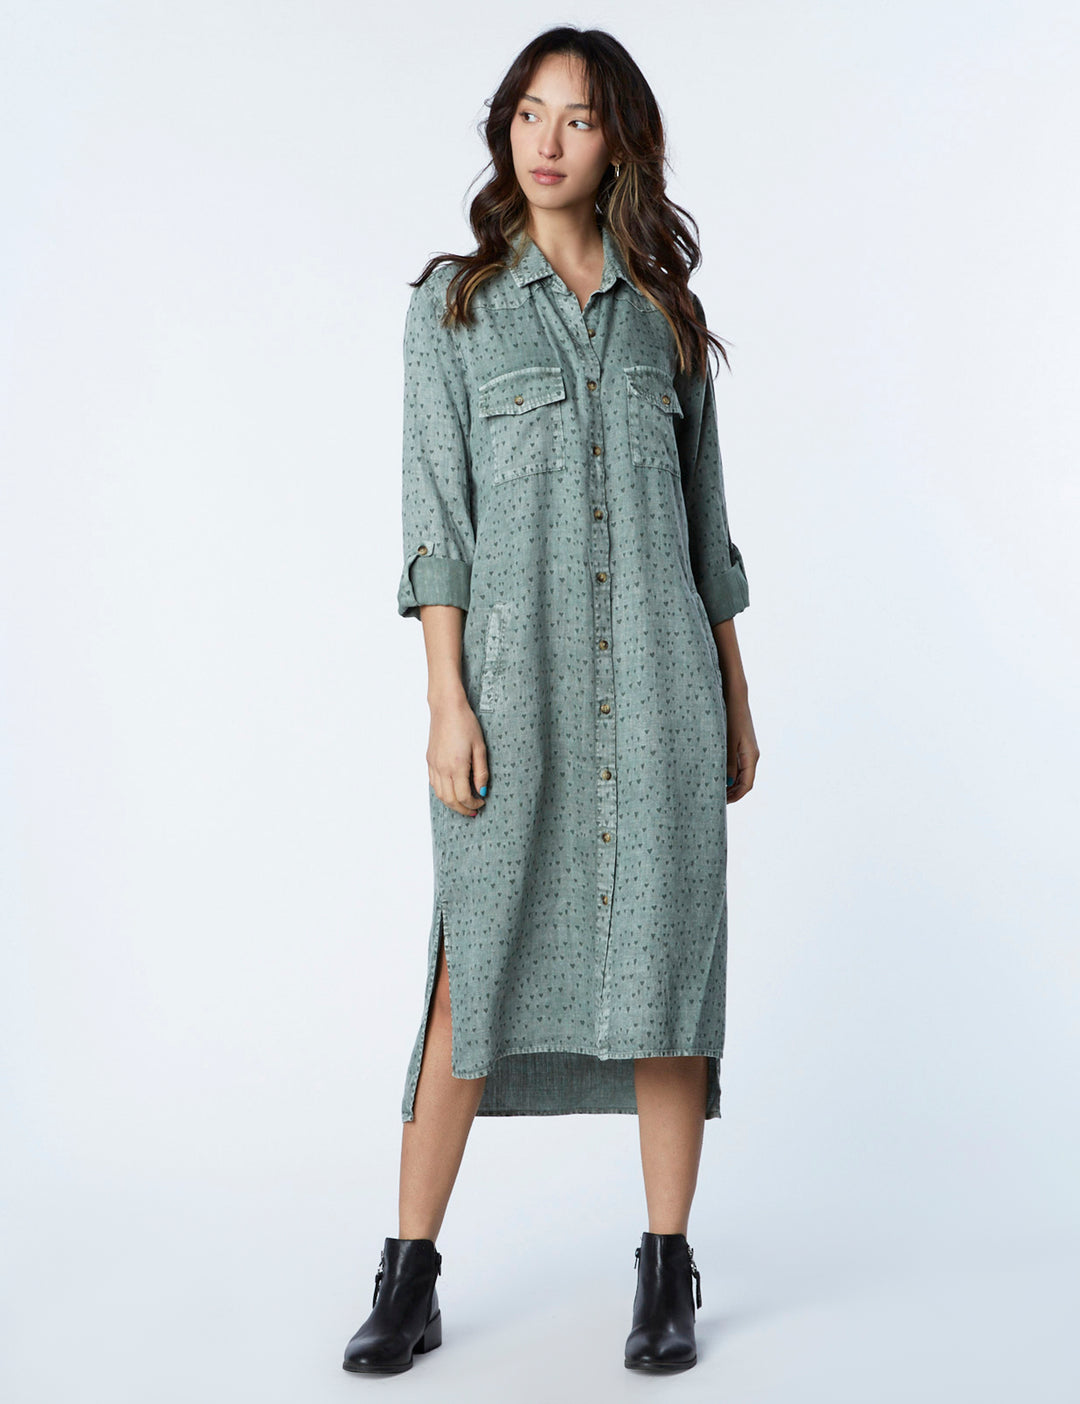 ARMY HEARTS SHIRT DRESS HEARTS - Kingfisher Road - Online Boutique